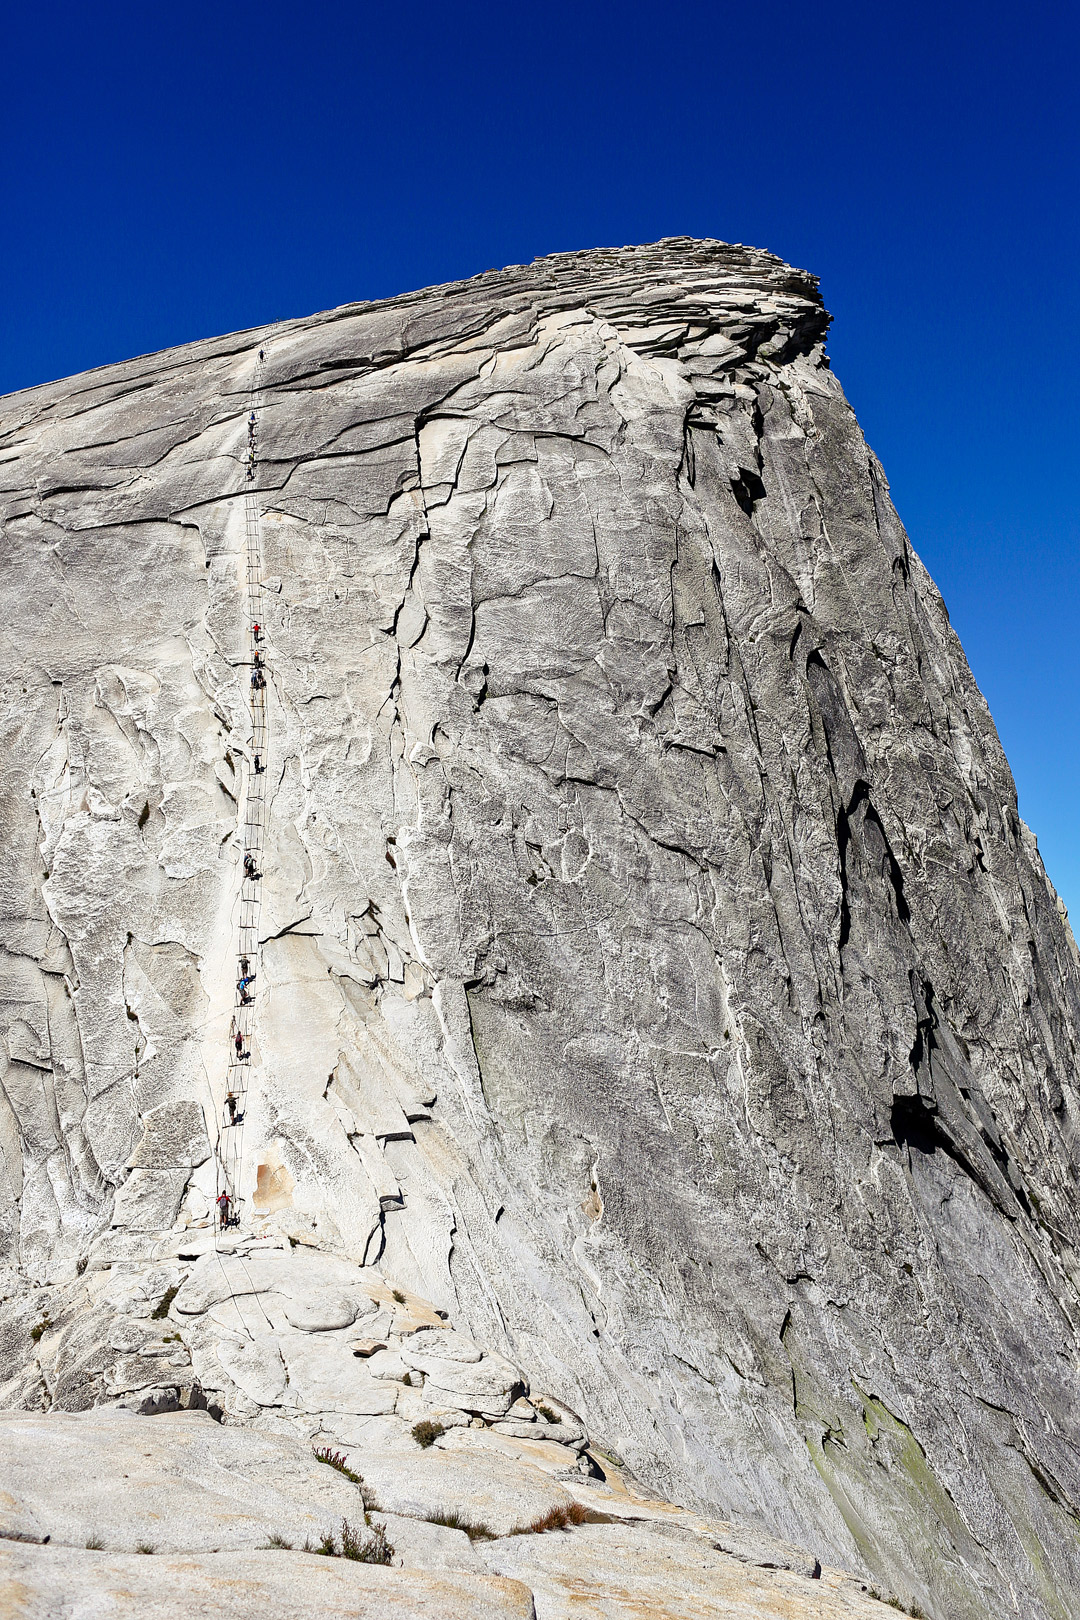 Hiking Half Dome + Traveling to Yosemite National Park? Take a look at these 11 best hikes in Yosemite National Park. These Yosemite hiking trails are also some of the best hiking trails in California and the US that you’ll want to add to your hiking bucket lists. They take you to some of the most beautiful places and best views in Yosemite. // Local Adventurer #localadventurer #yosemite #california #nationalpark #visitcalifornia #visitca #findyourpark